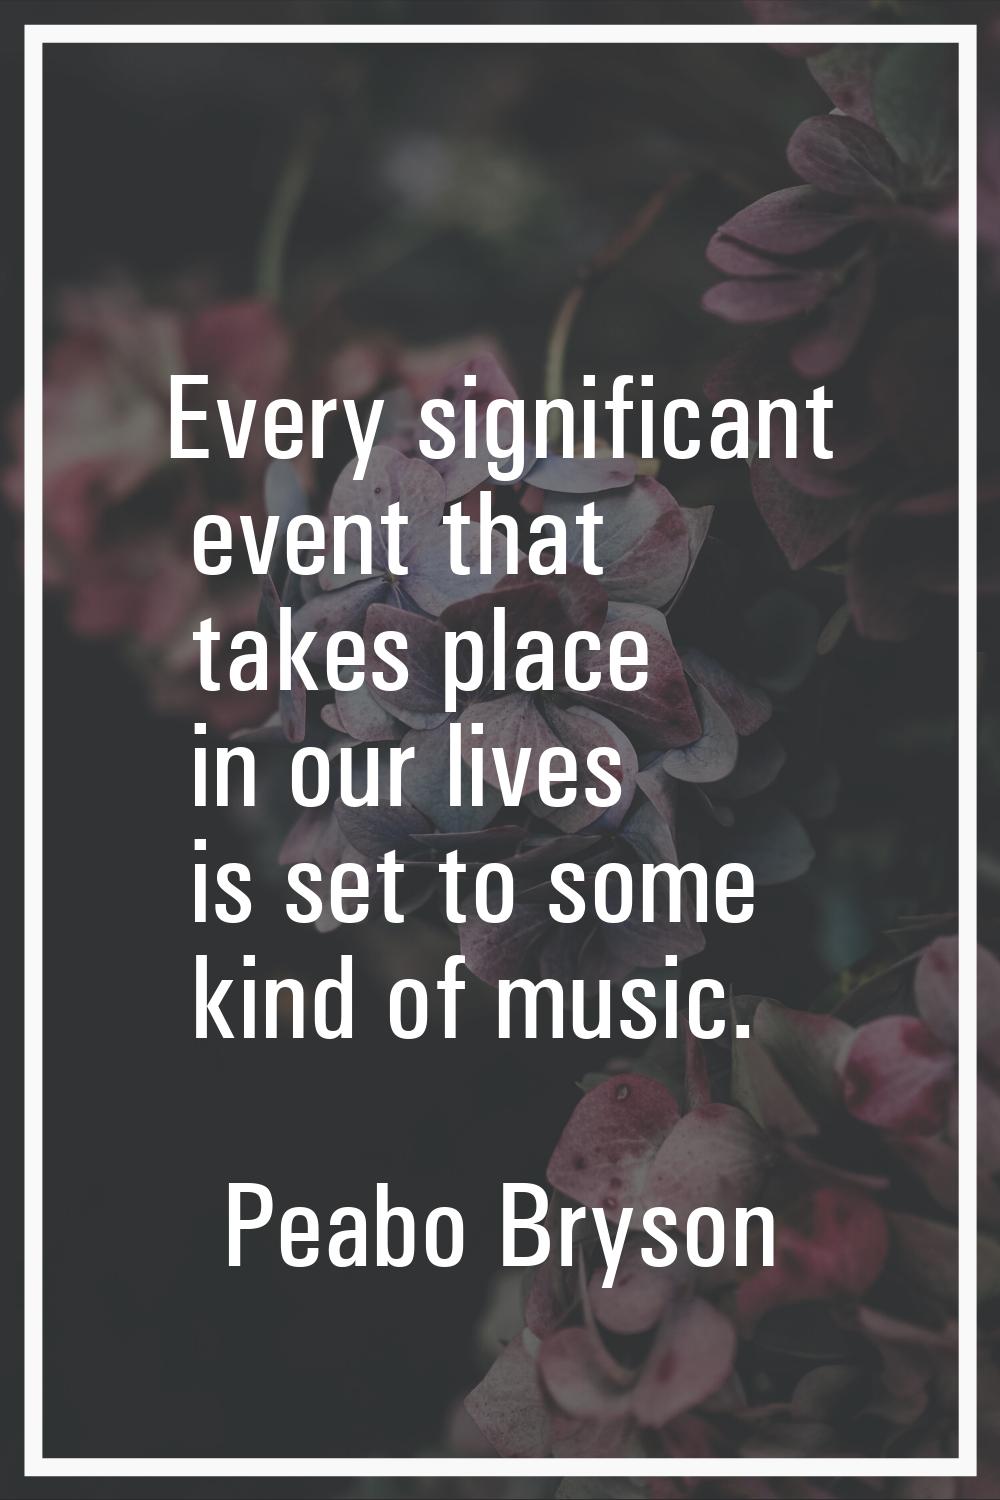 Every significant event that takes place in our lives is set to some kind of music.